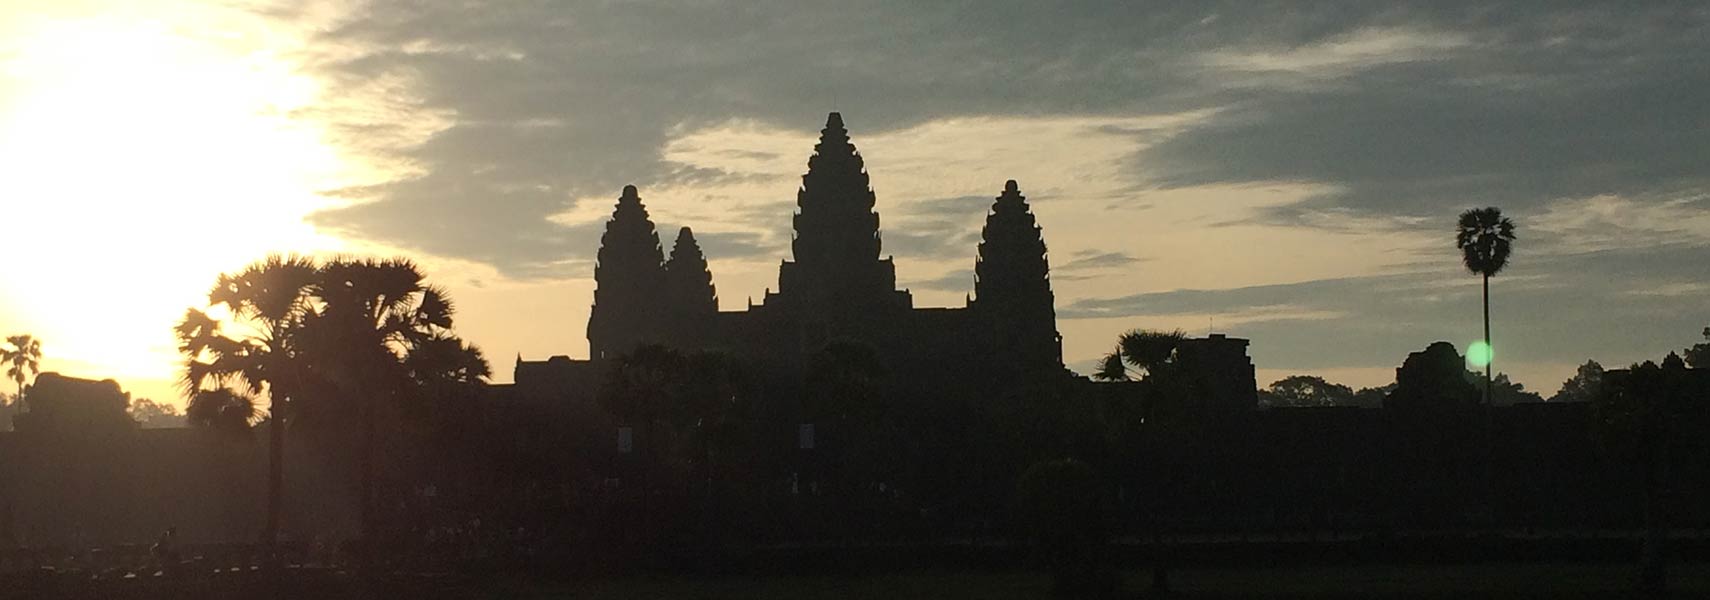 Main view of Angkor Wat temple complex, Cambodia